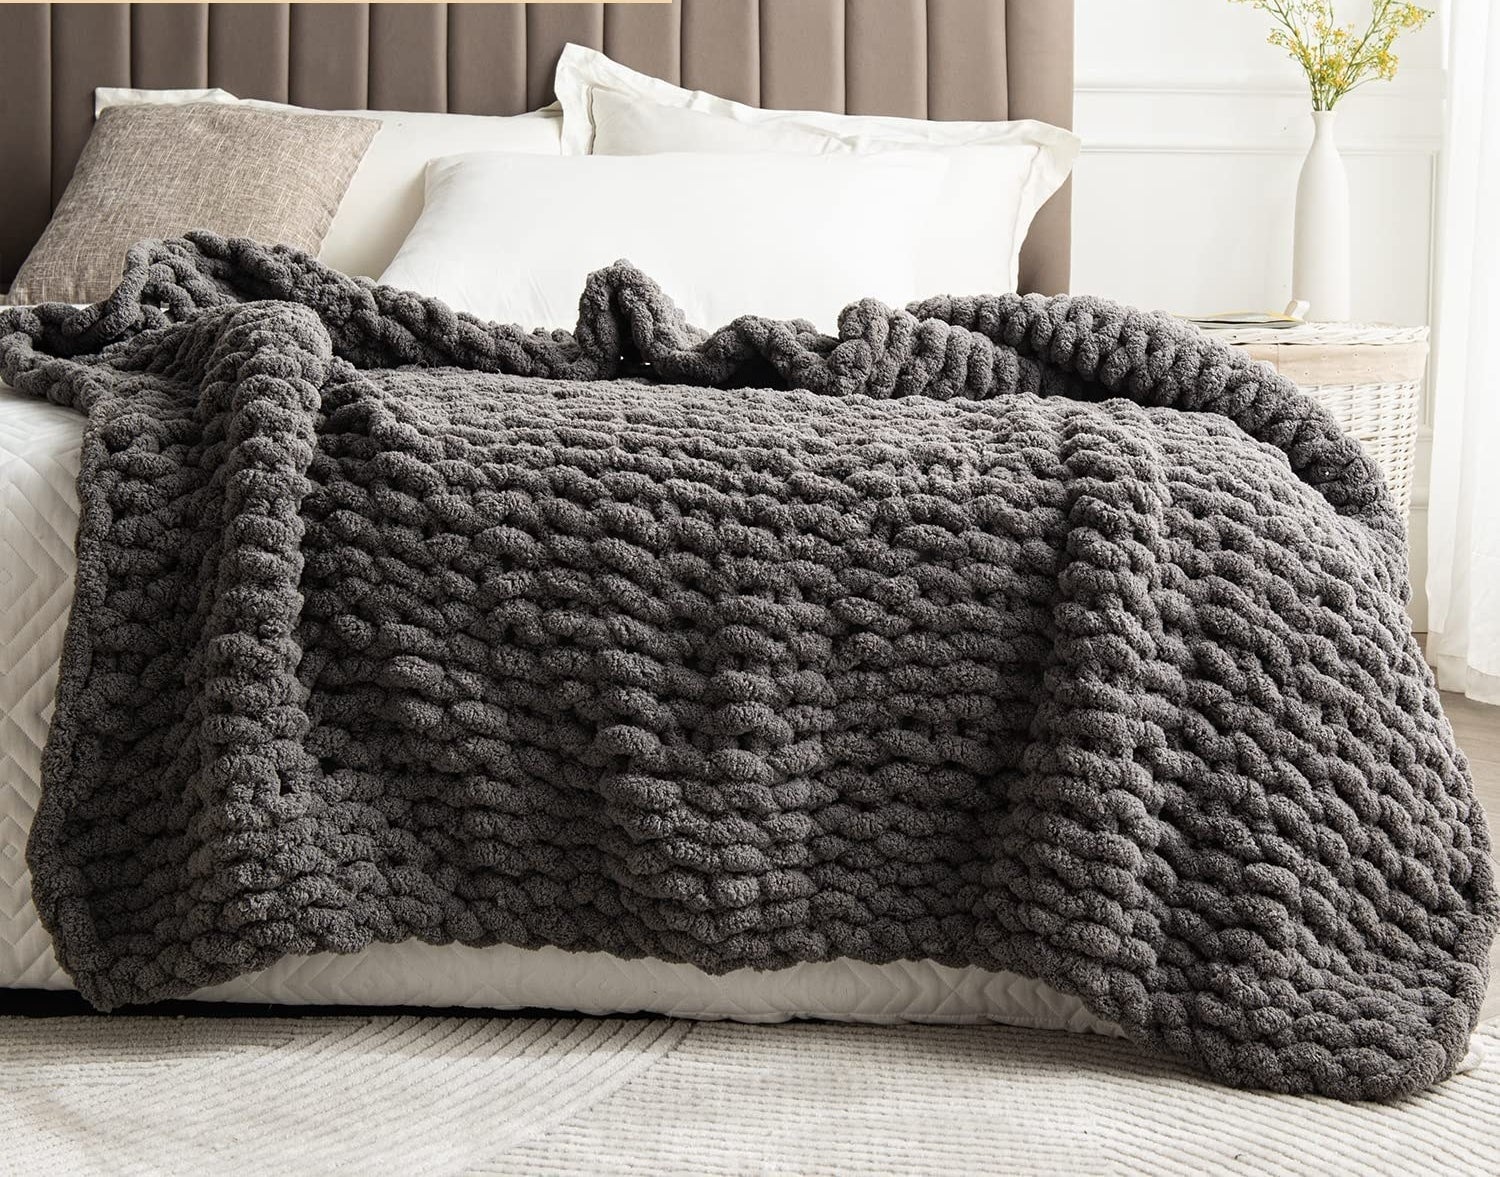 A chunky knit blanket on the end of a bed